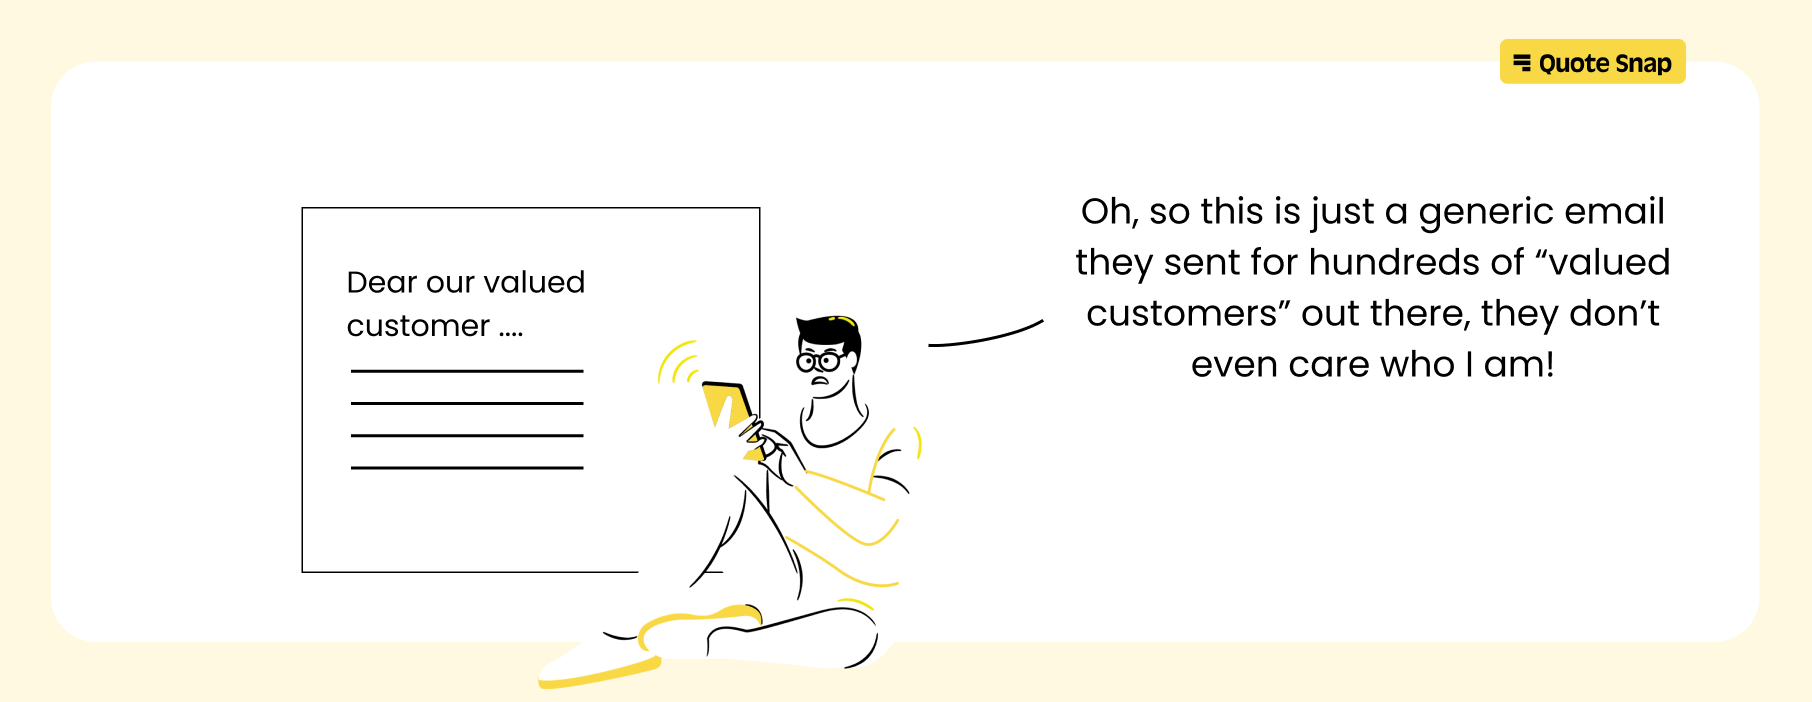 Personalize transactional emails for better performance